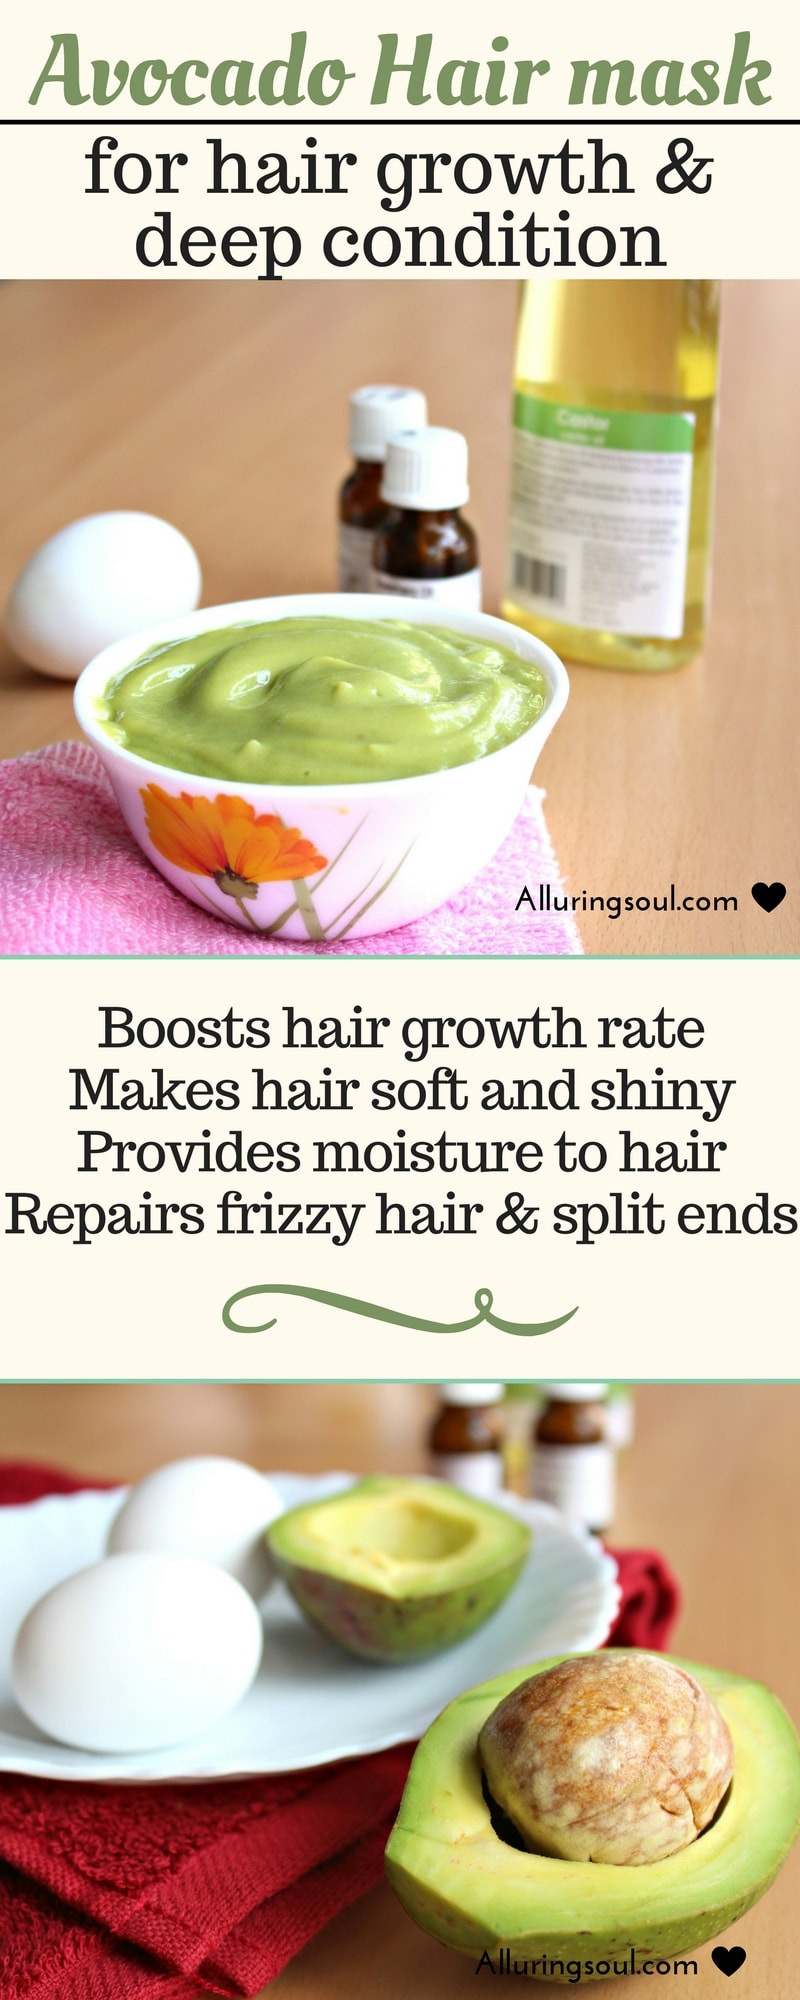 DIY Hair Masks For Curly Hair
 The Best DIY Avocado Mask For Curls